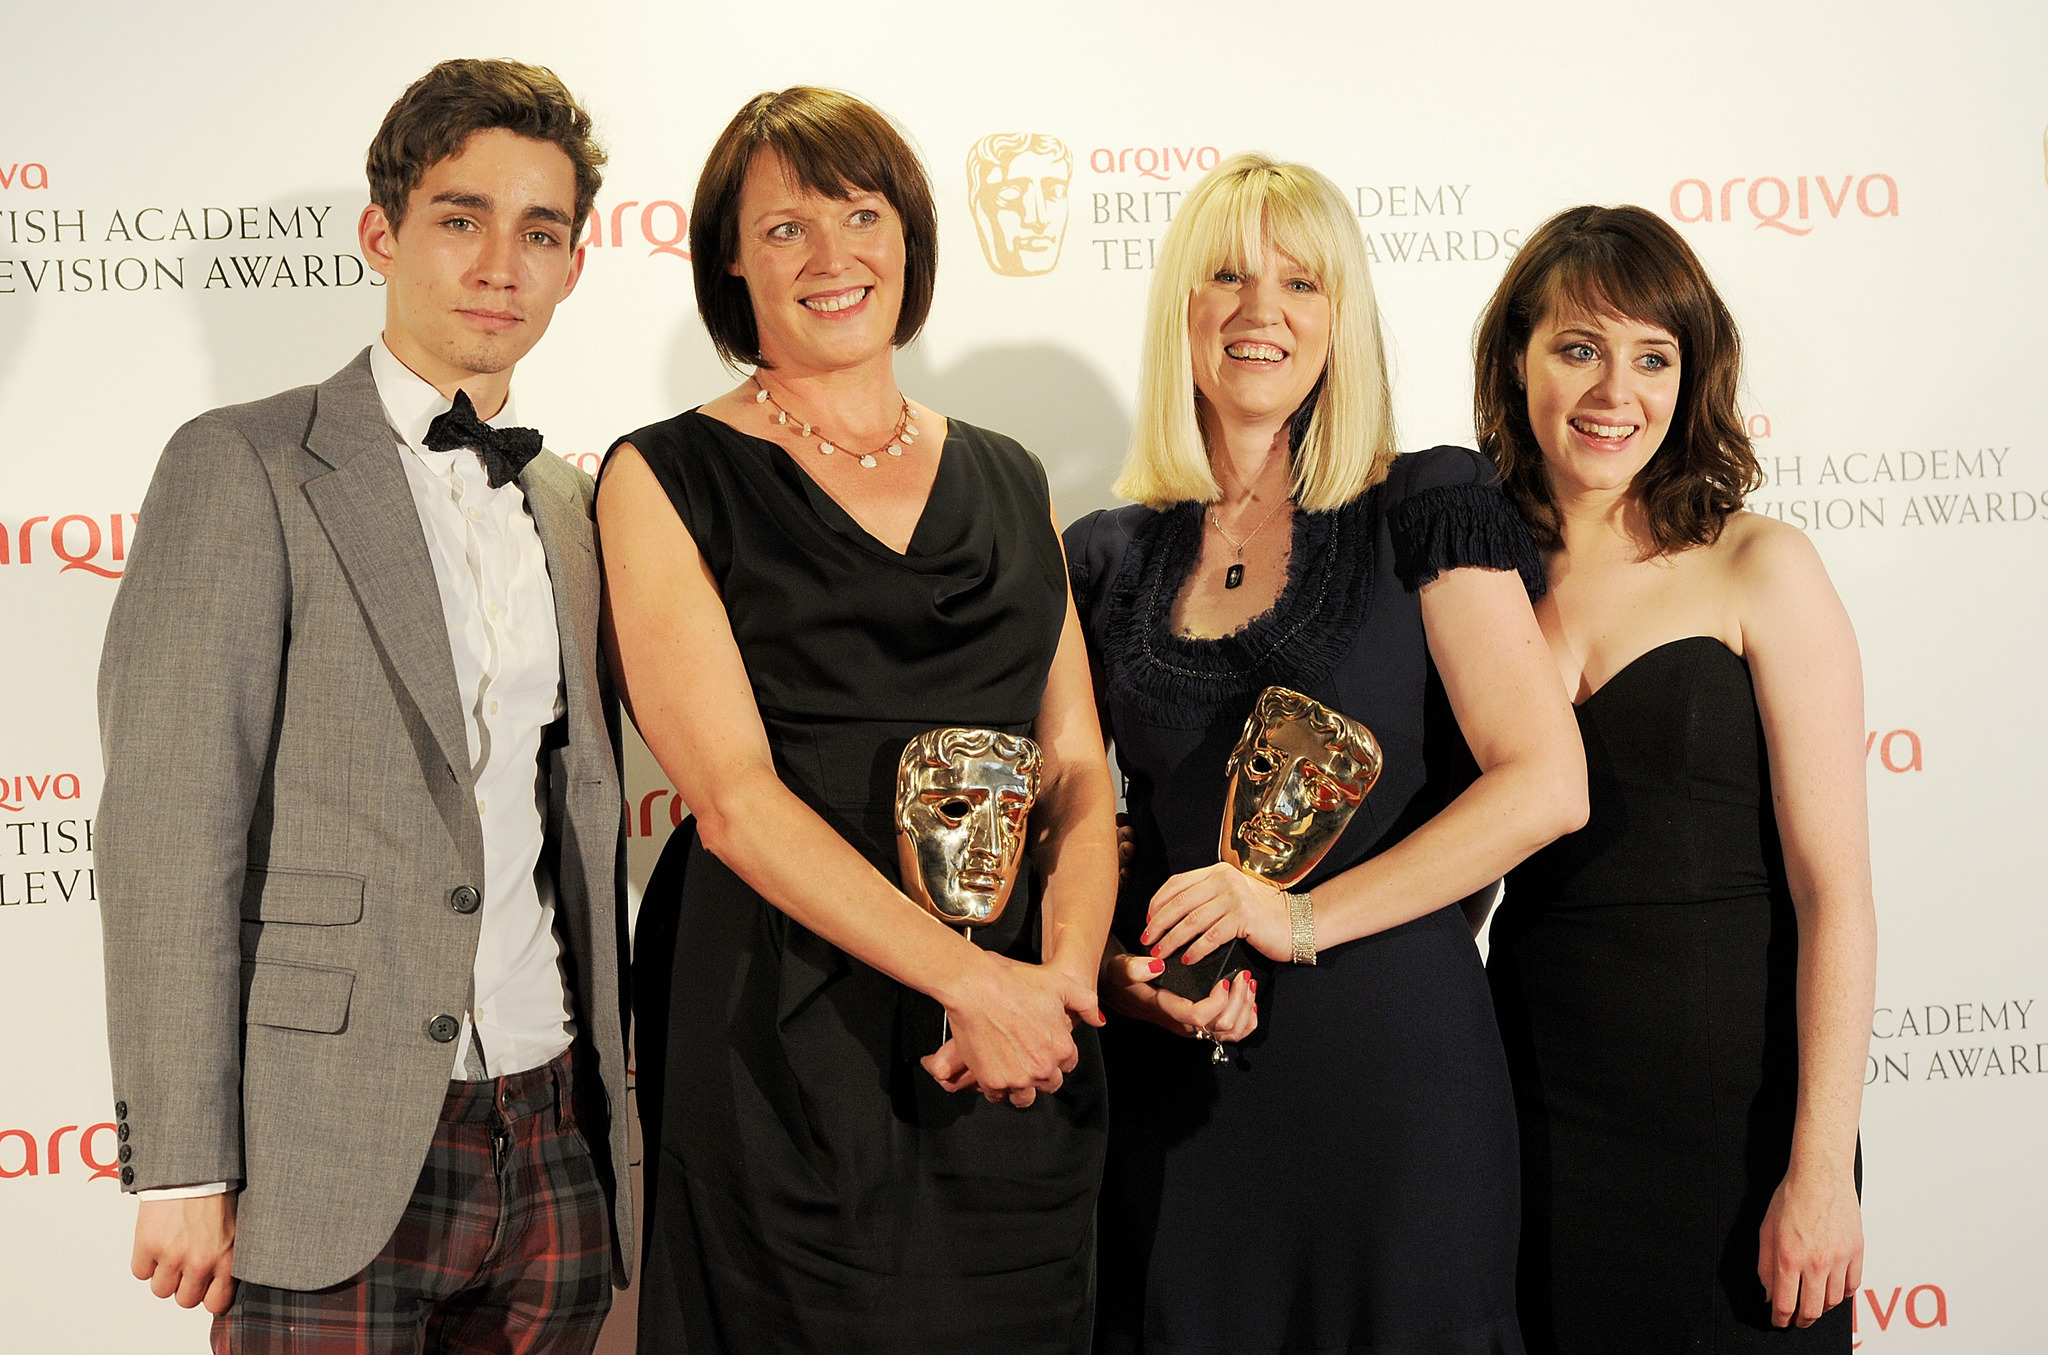 Polly Leys, Robert Sheehan, Kate Norrish and Claire Foy